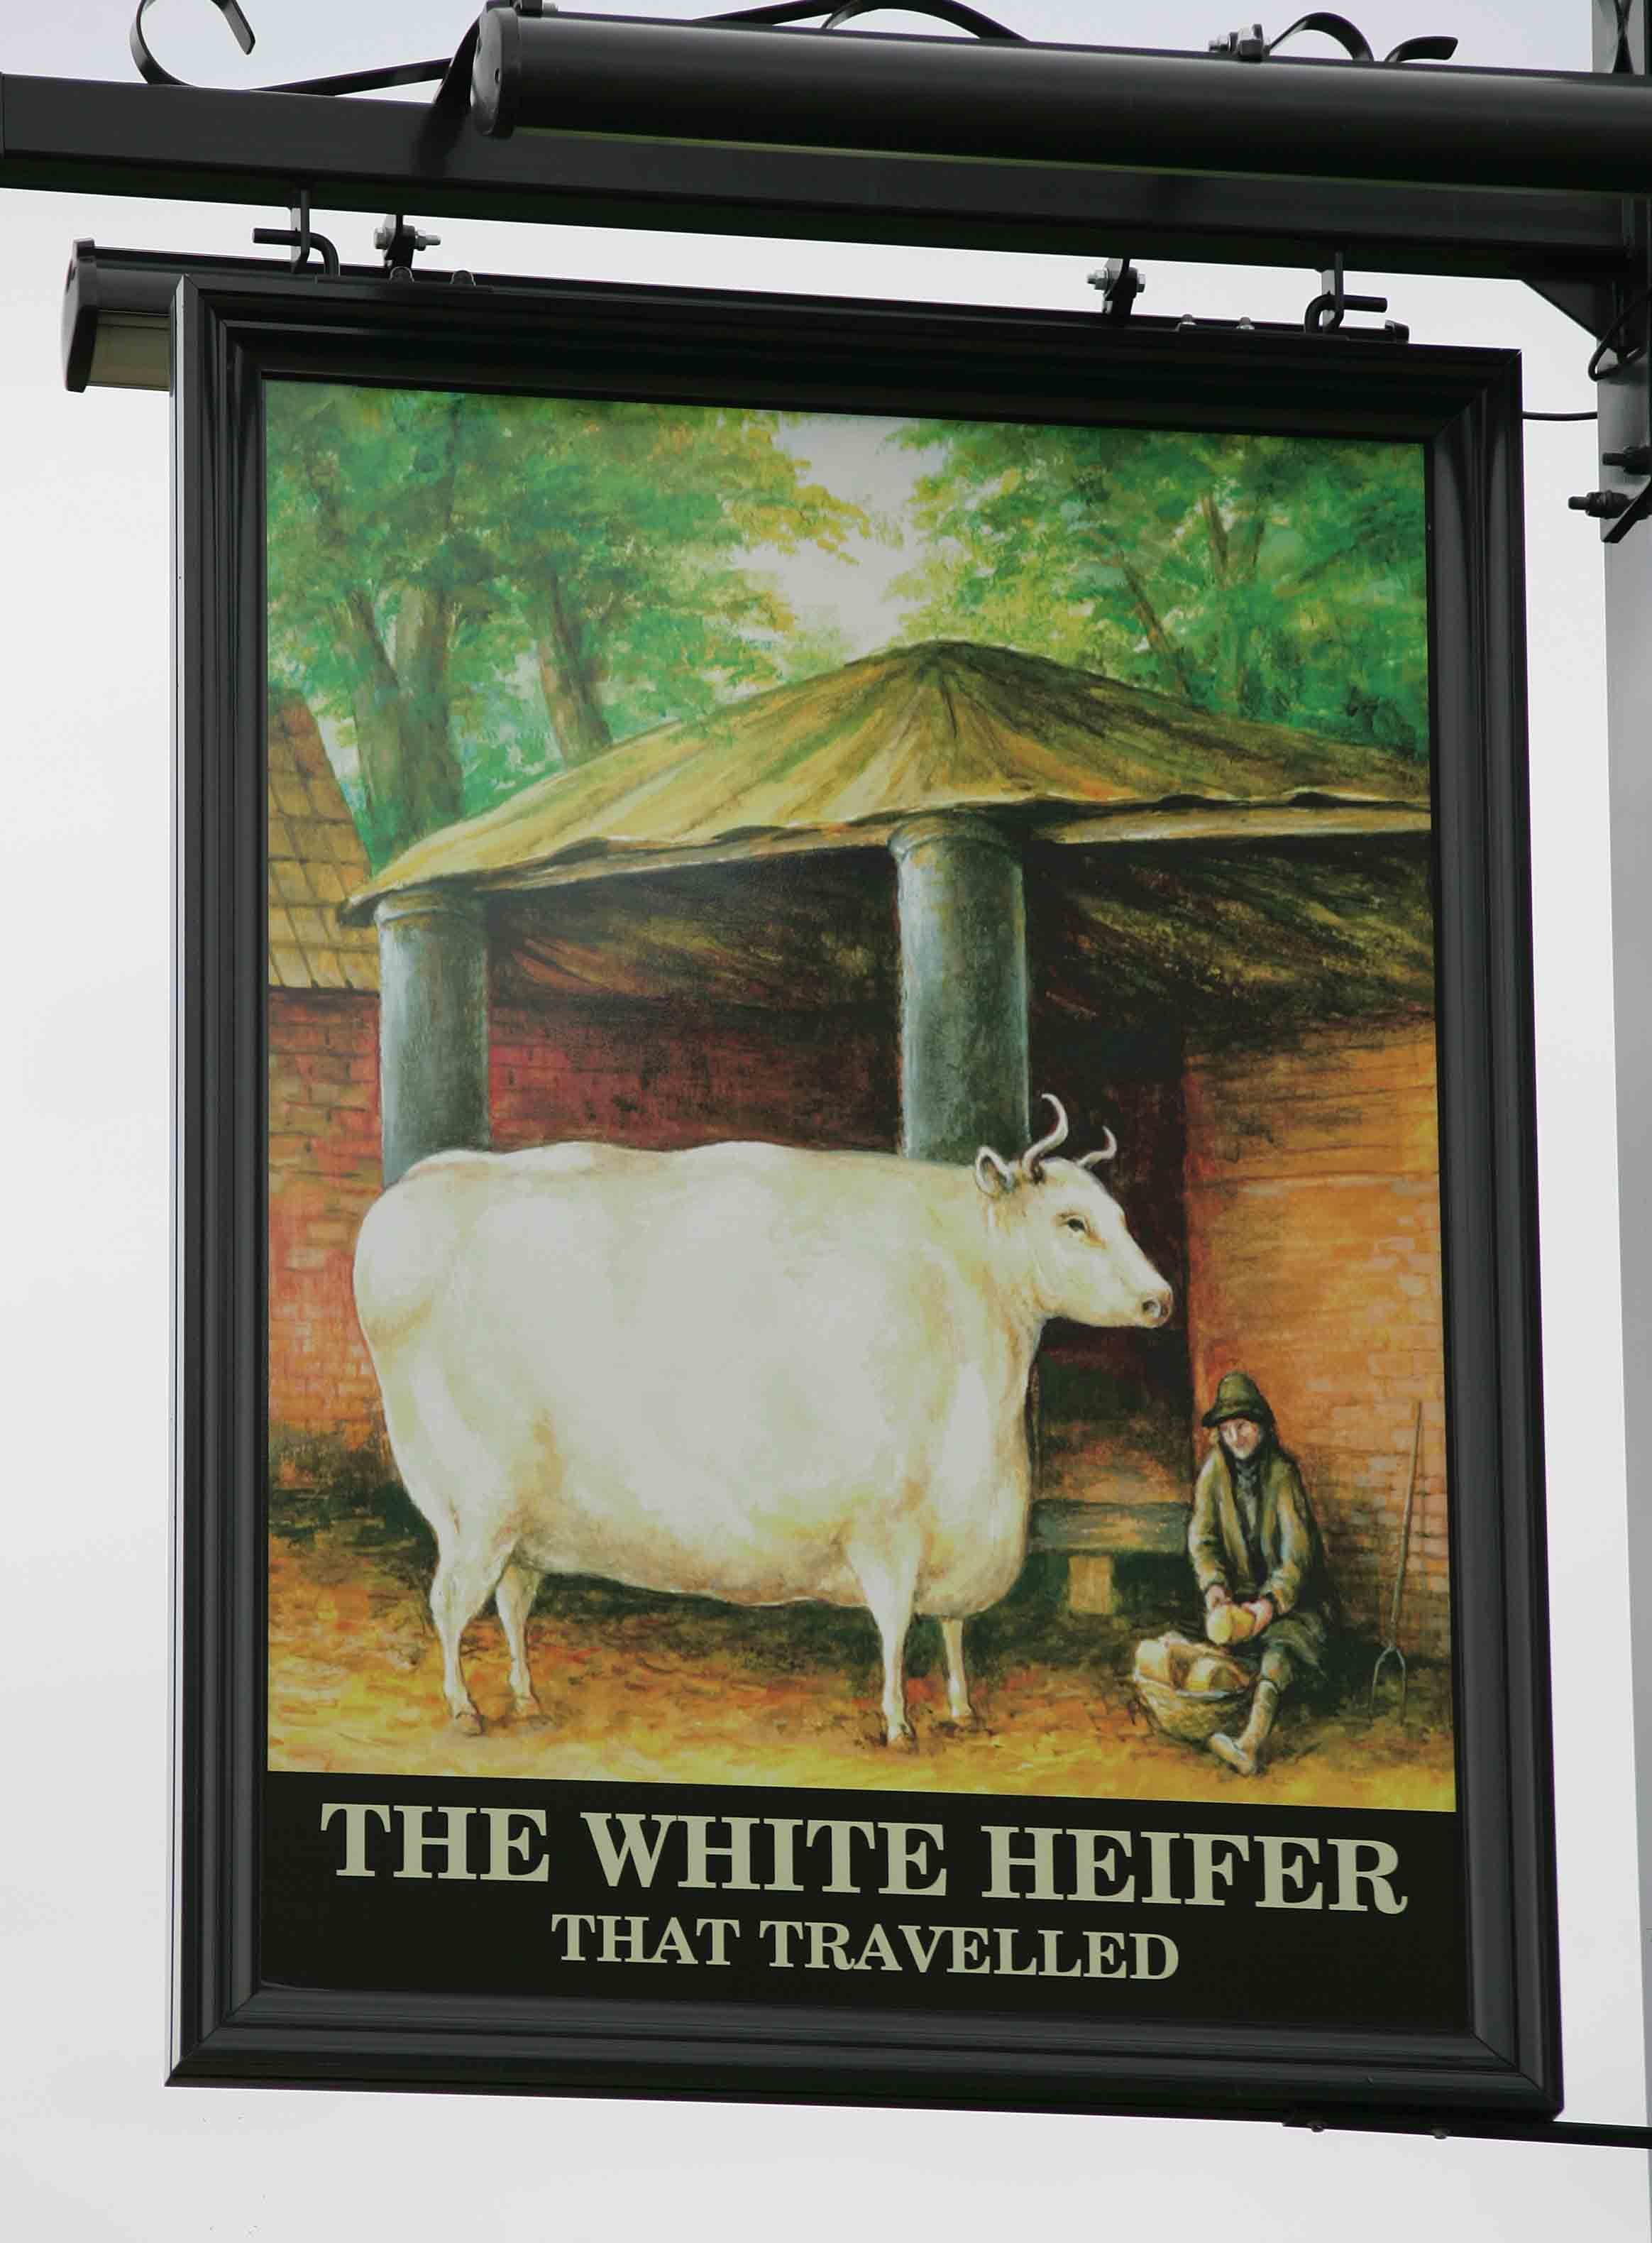 The White Heifer That Travelled on the pub sign in West Park, Darlington. The heifer was big in London in the 1800s and was picturedd with a man feeding it turnips